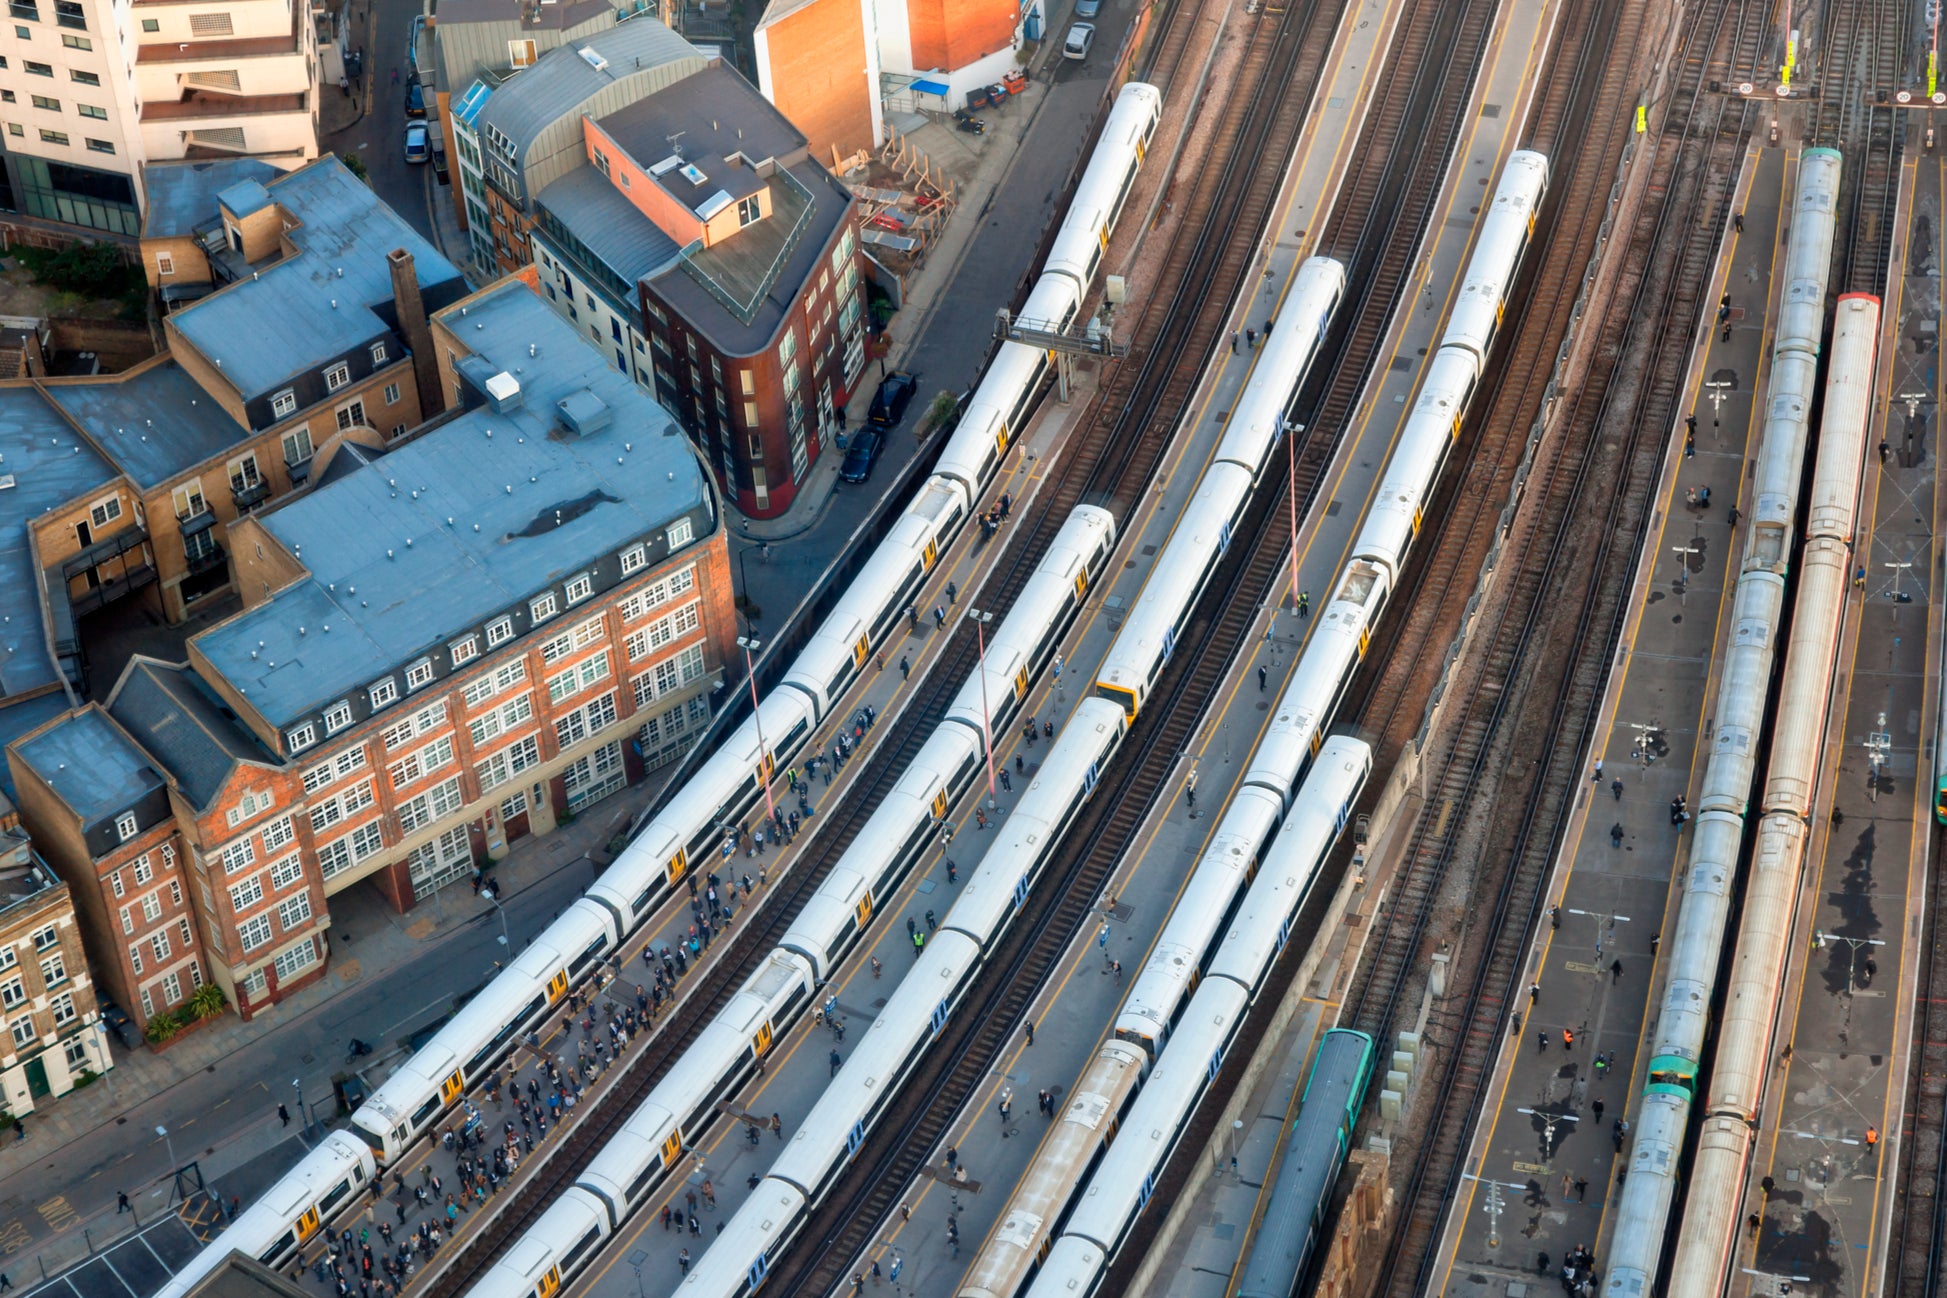 Problems with Trainline came as millions of people made their way to work